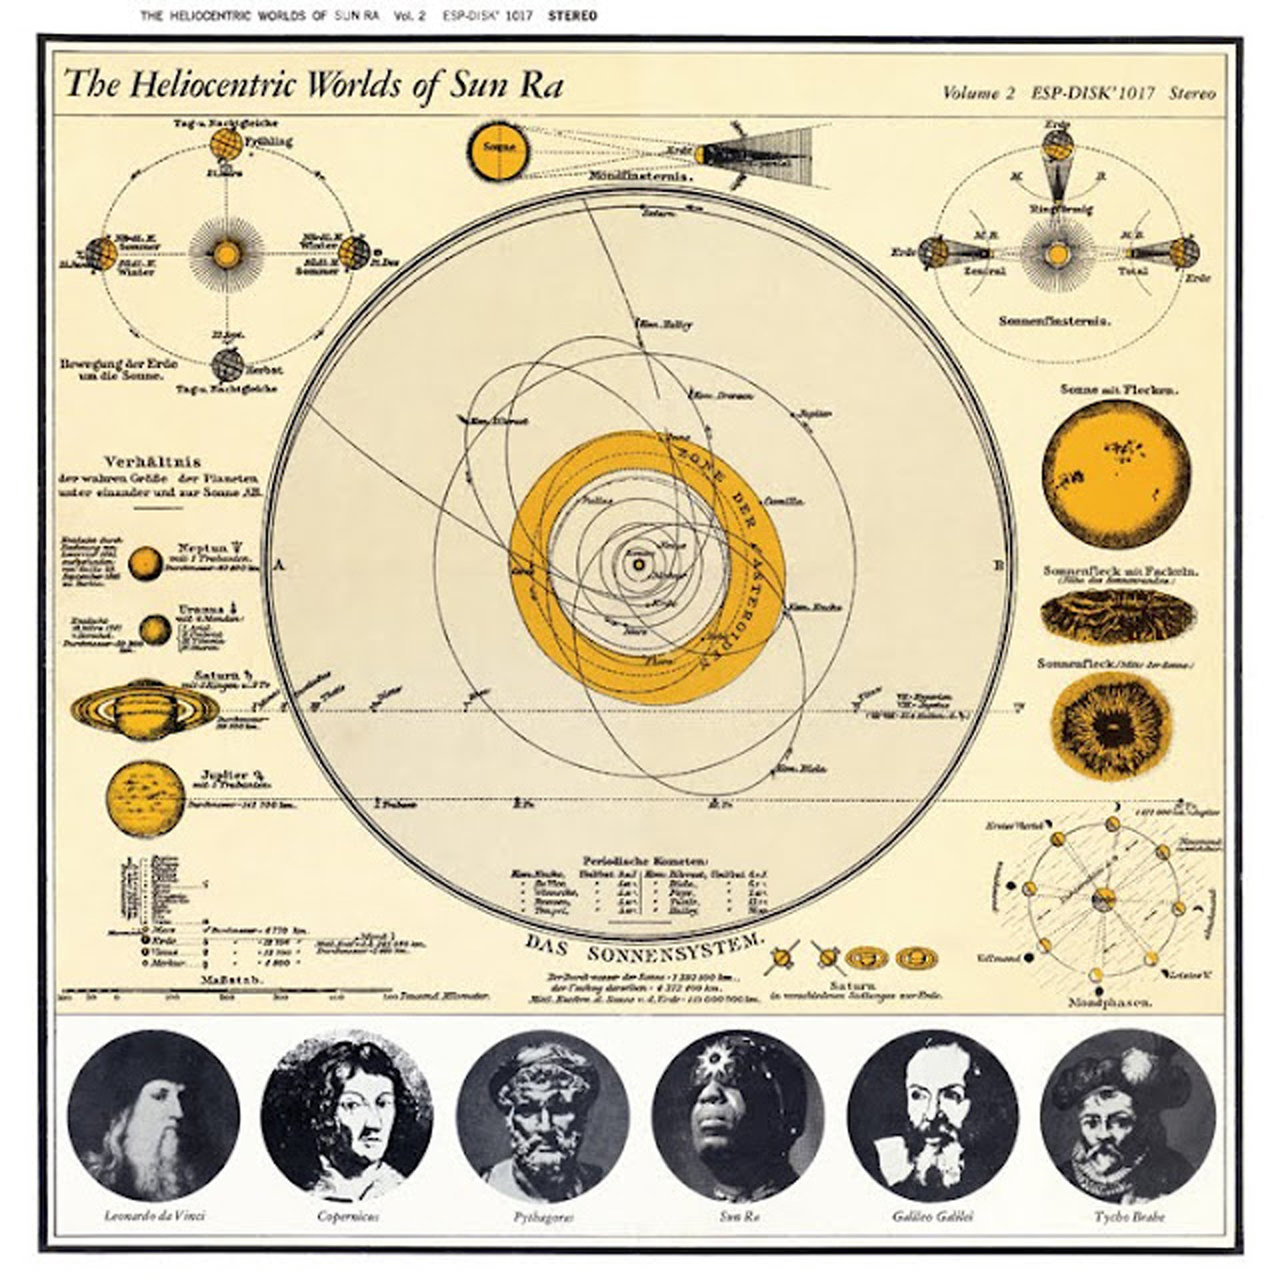 The Heliocentric Worlds of Sun Ra, Vol. 2 [1965]